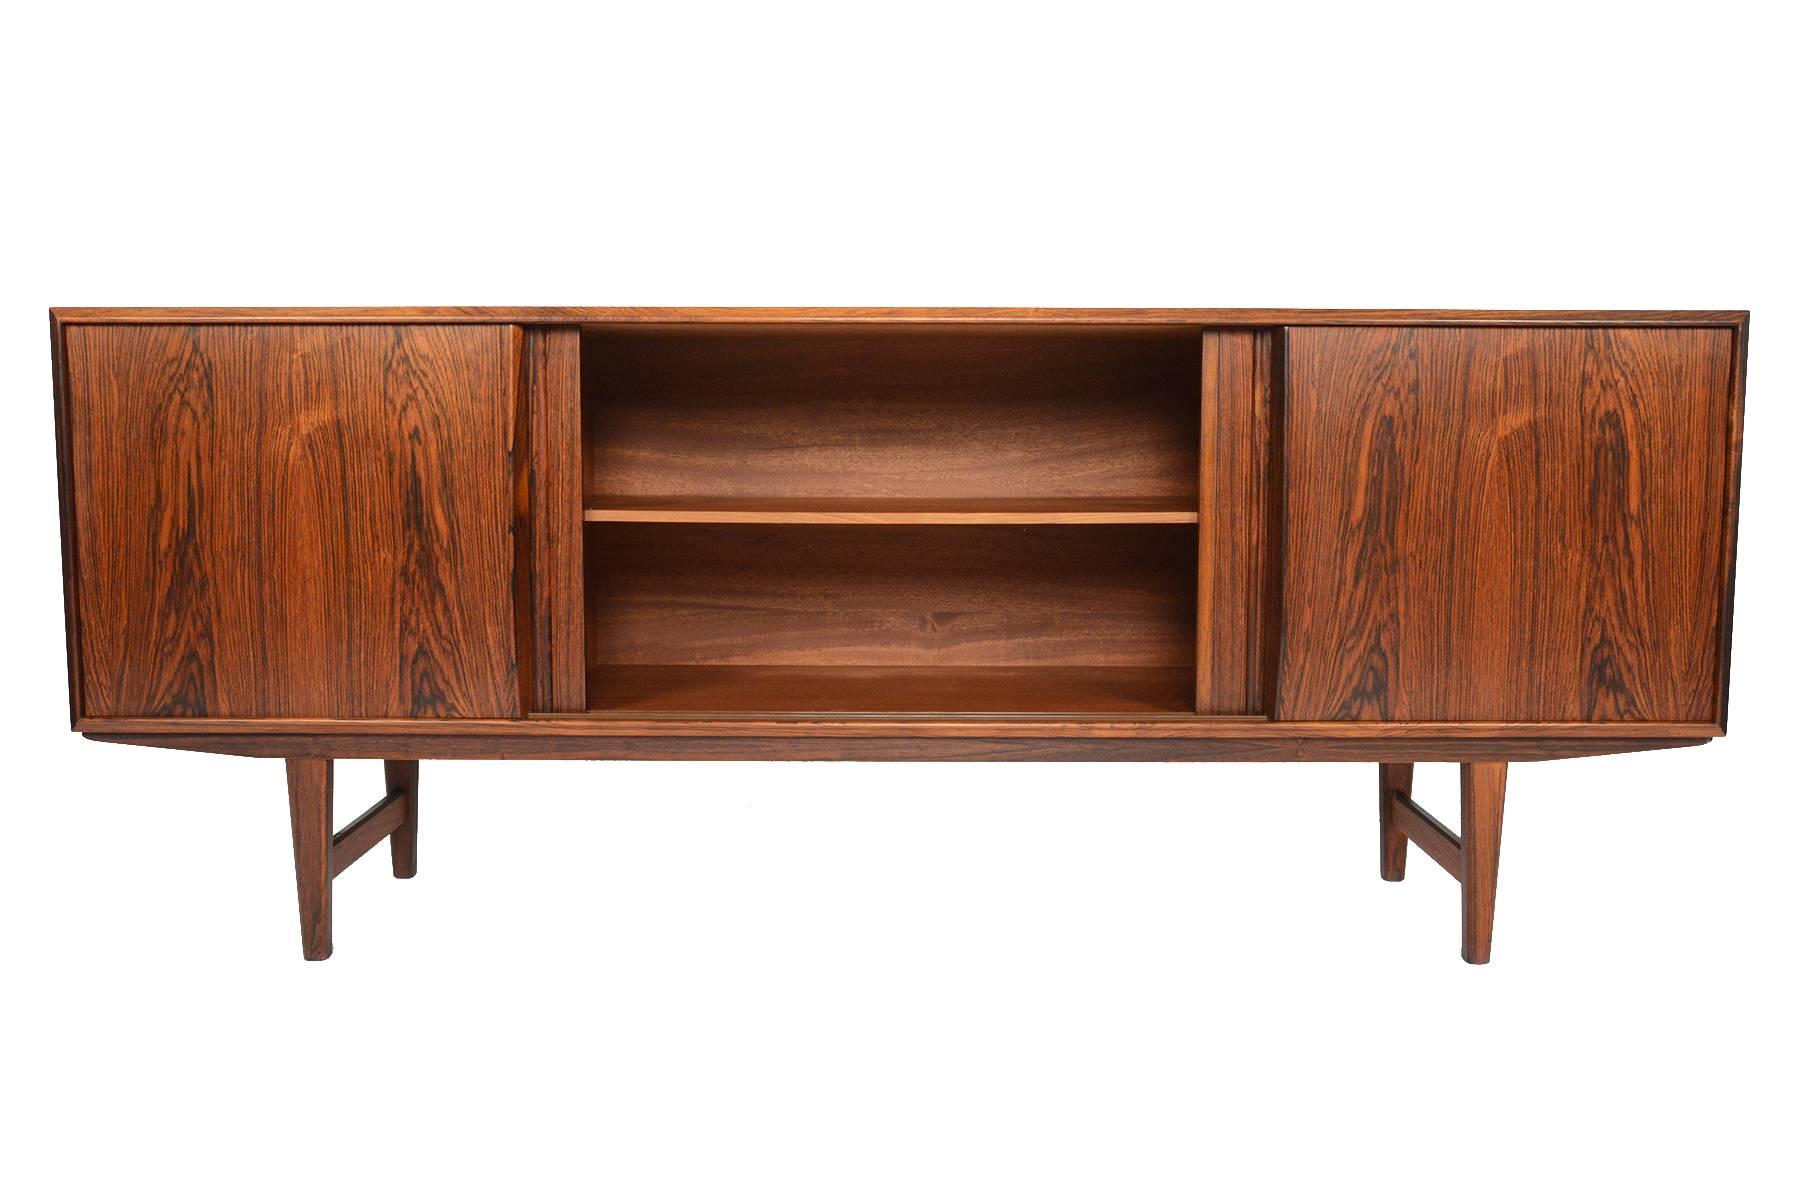 This Danish modern Mid-Century credenza in rosewood was designed by E.W. Bach for Sejling Skabe. With smoothly sliding doors accented by hand-carved pulls, this is a great storage solution for any modern home. All bays feature adjustable shelves and